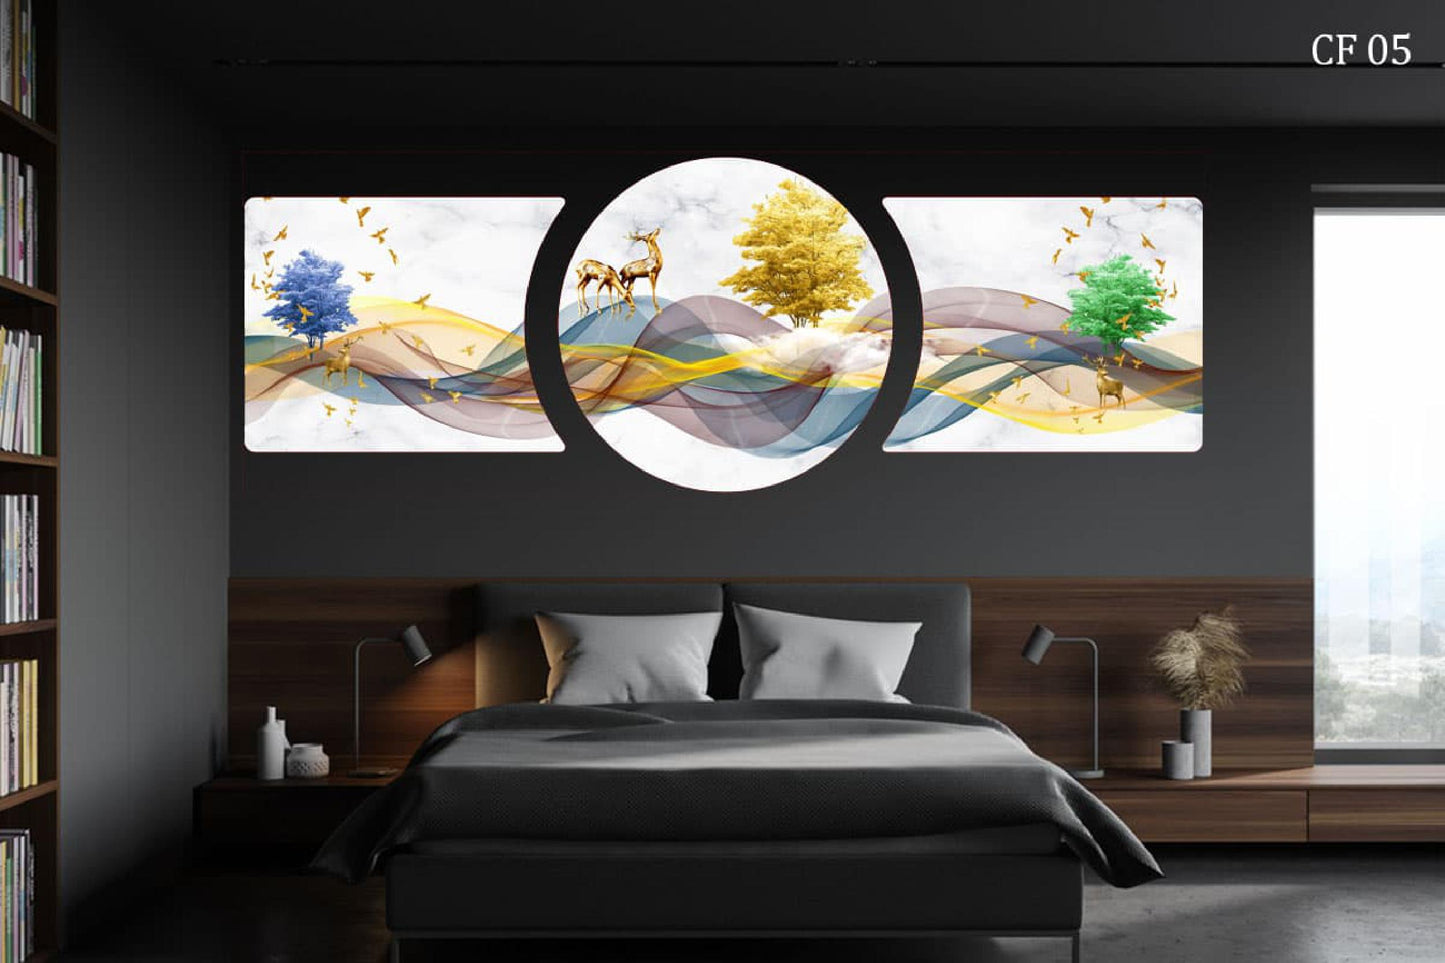 Resin Art Natural Wall Frame CF 05, Wall Decor For Living Room, For Home Decore , Office Decore and Gifting